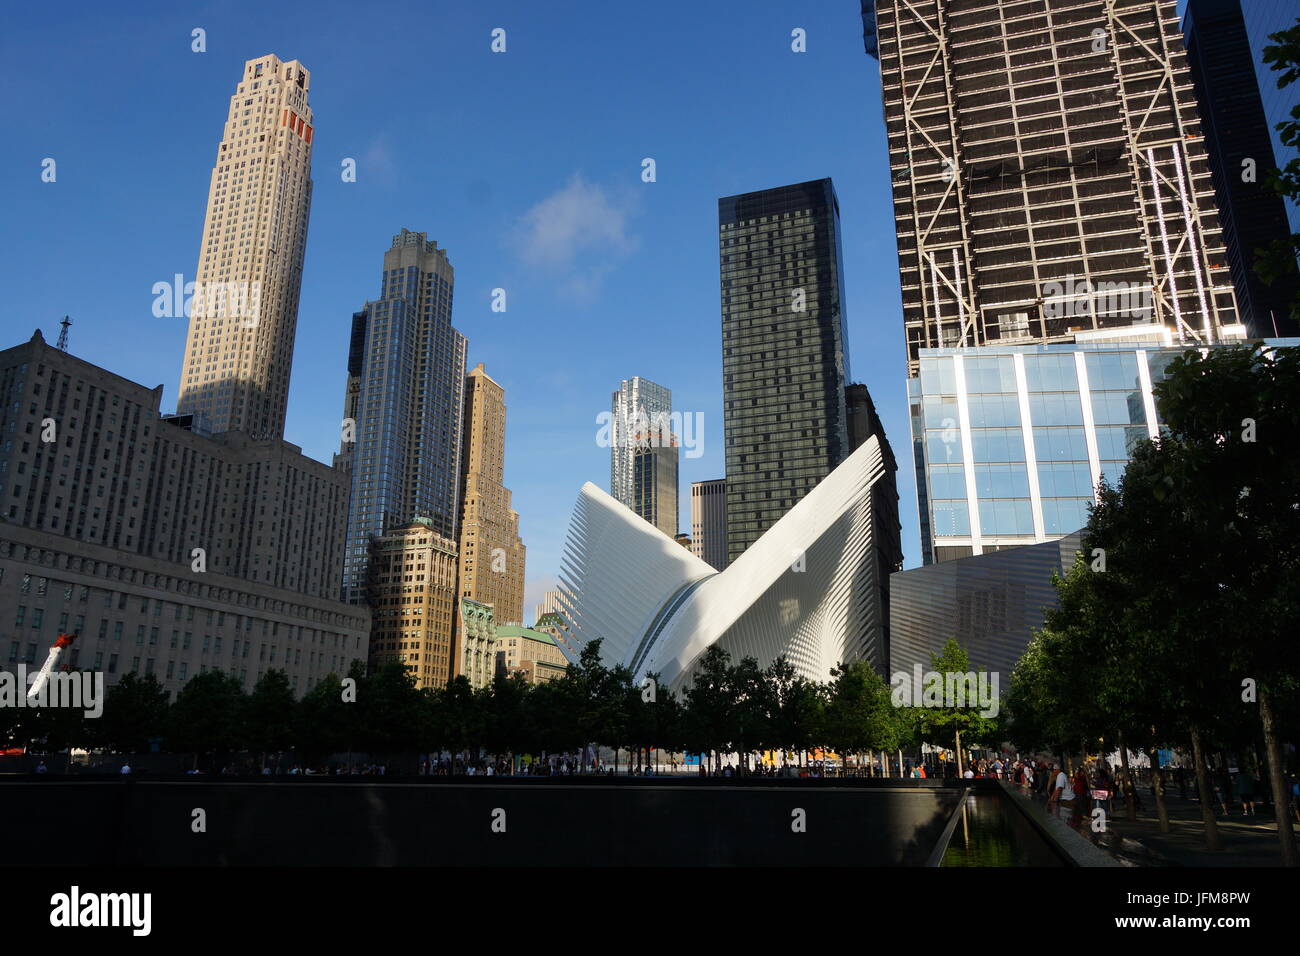 Reflecting pool and Oculus transportation hub by One World Trade Center, NY Stock Photo